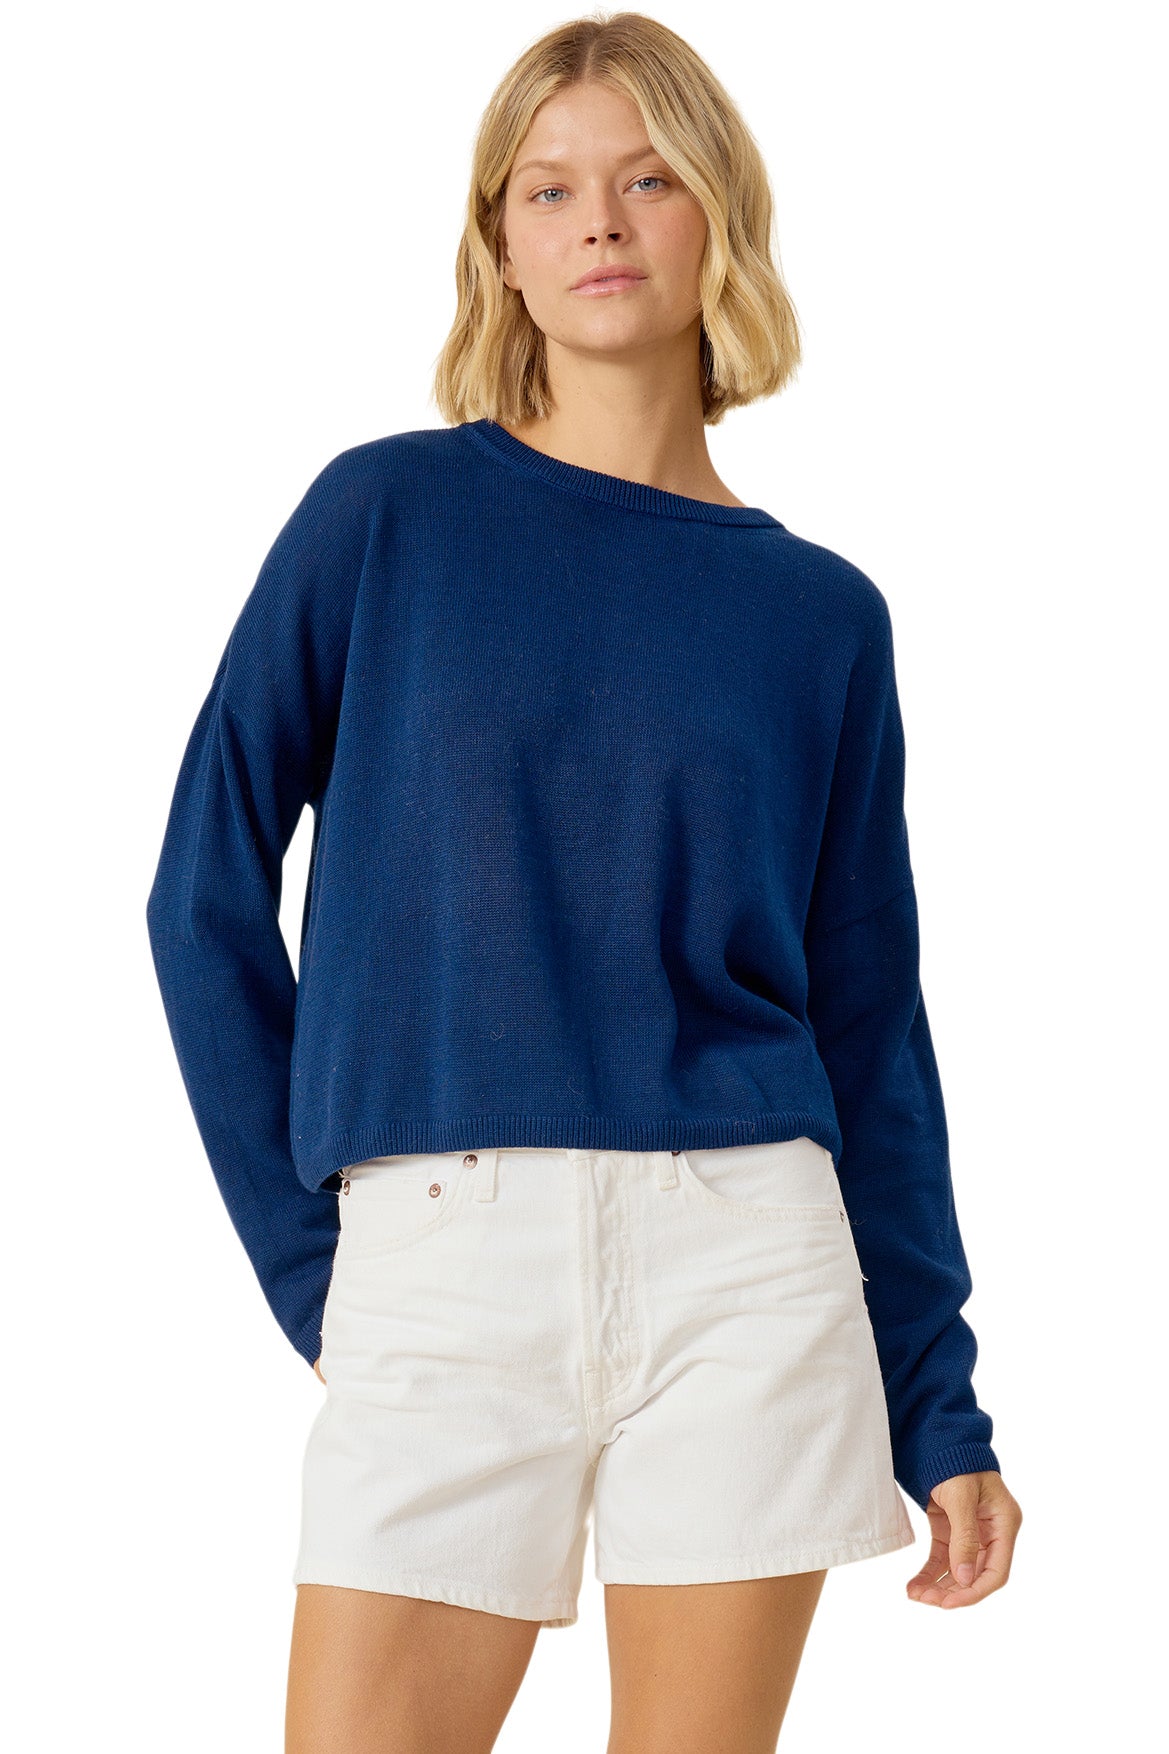 One Grey Day Polina Pullover in Navy